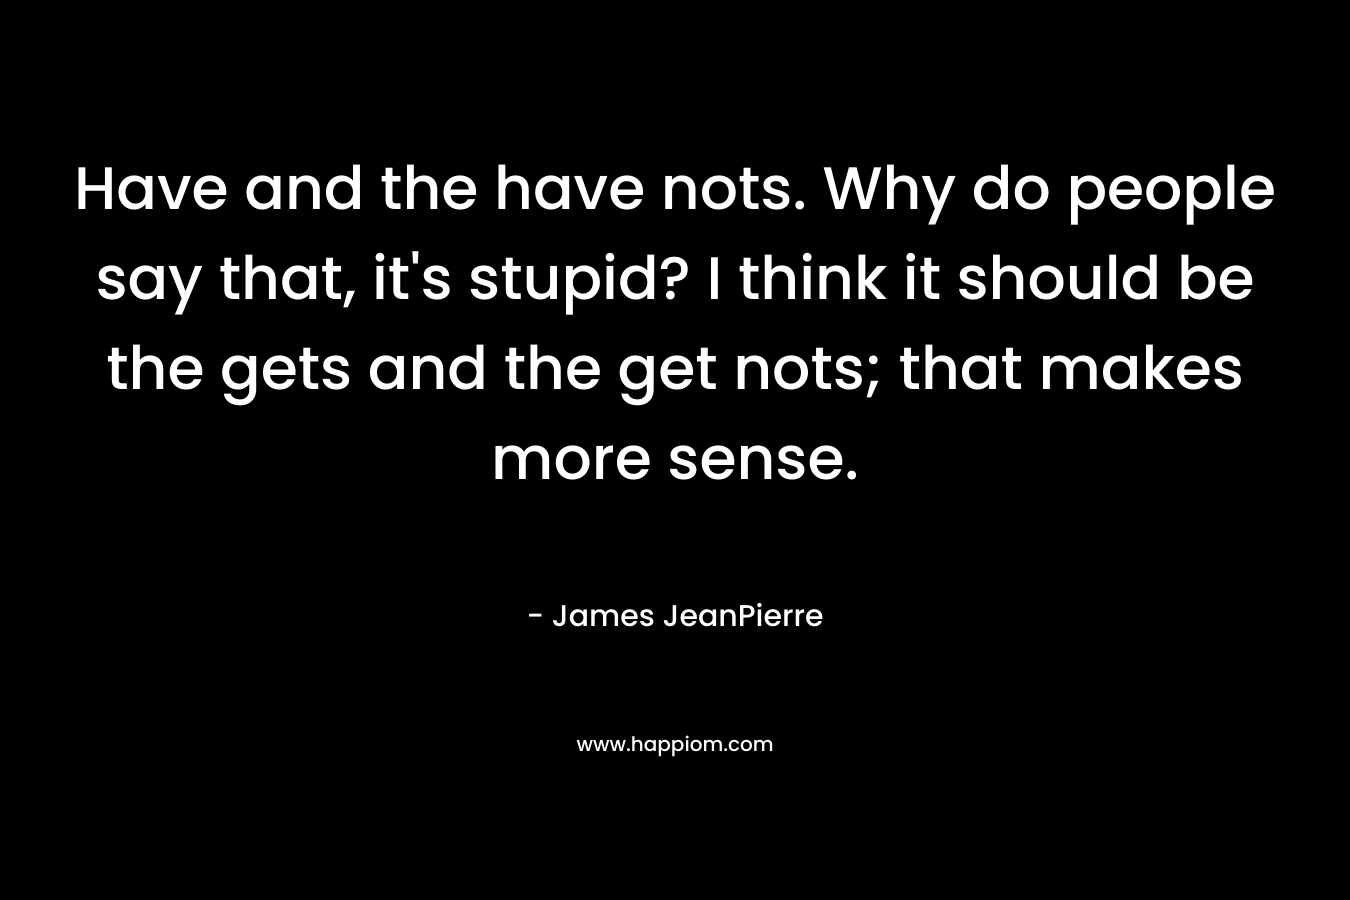 Have and the have nots. Why do people say that, it’s stupid? I think it should be the gets and the get nots; that makes more sense. – James JeanPierre